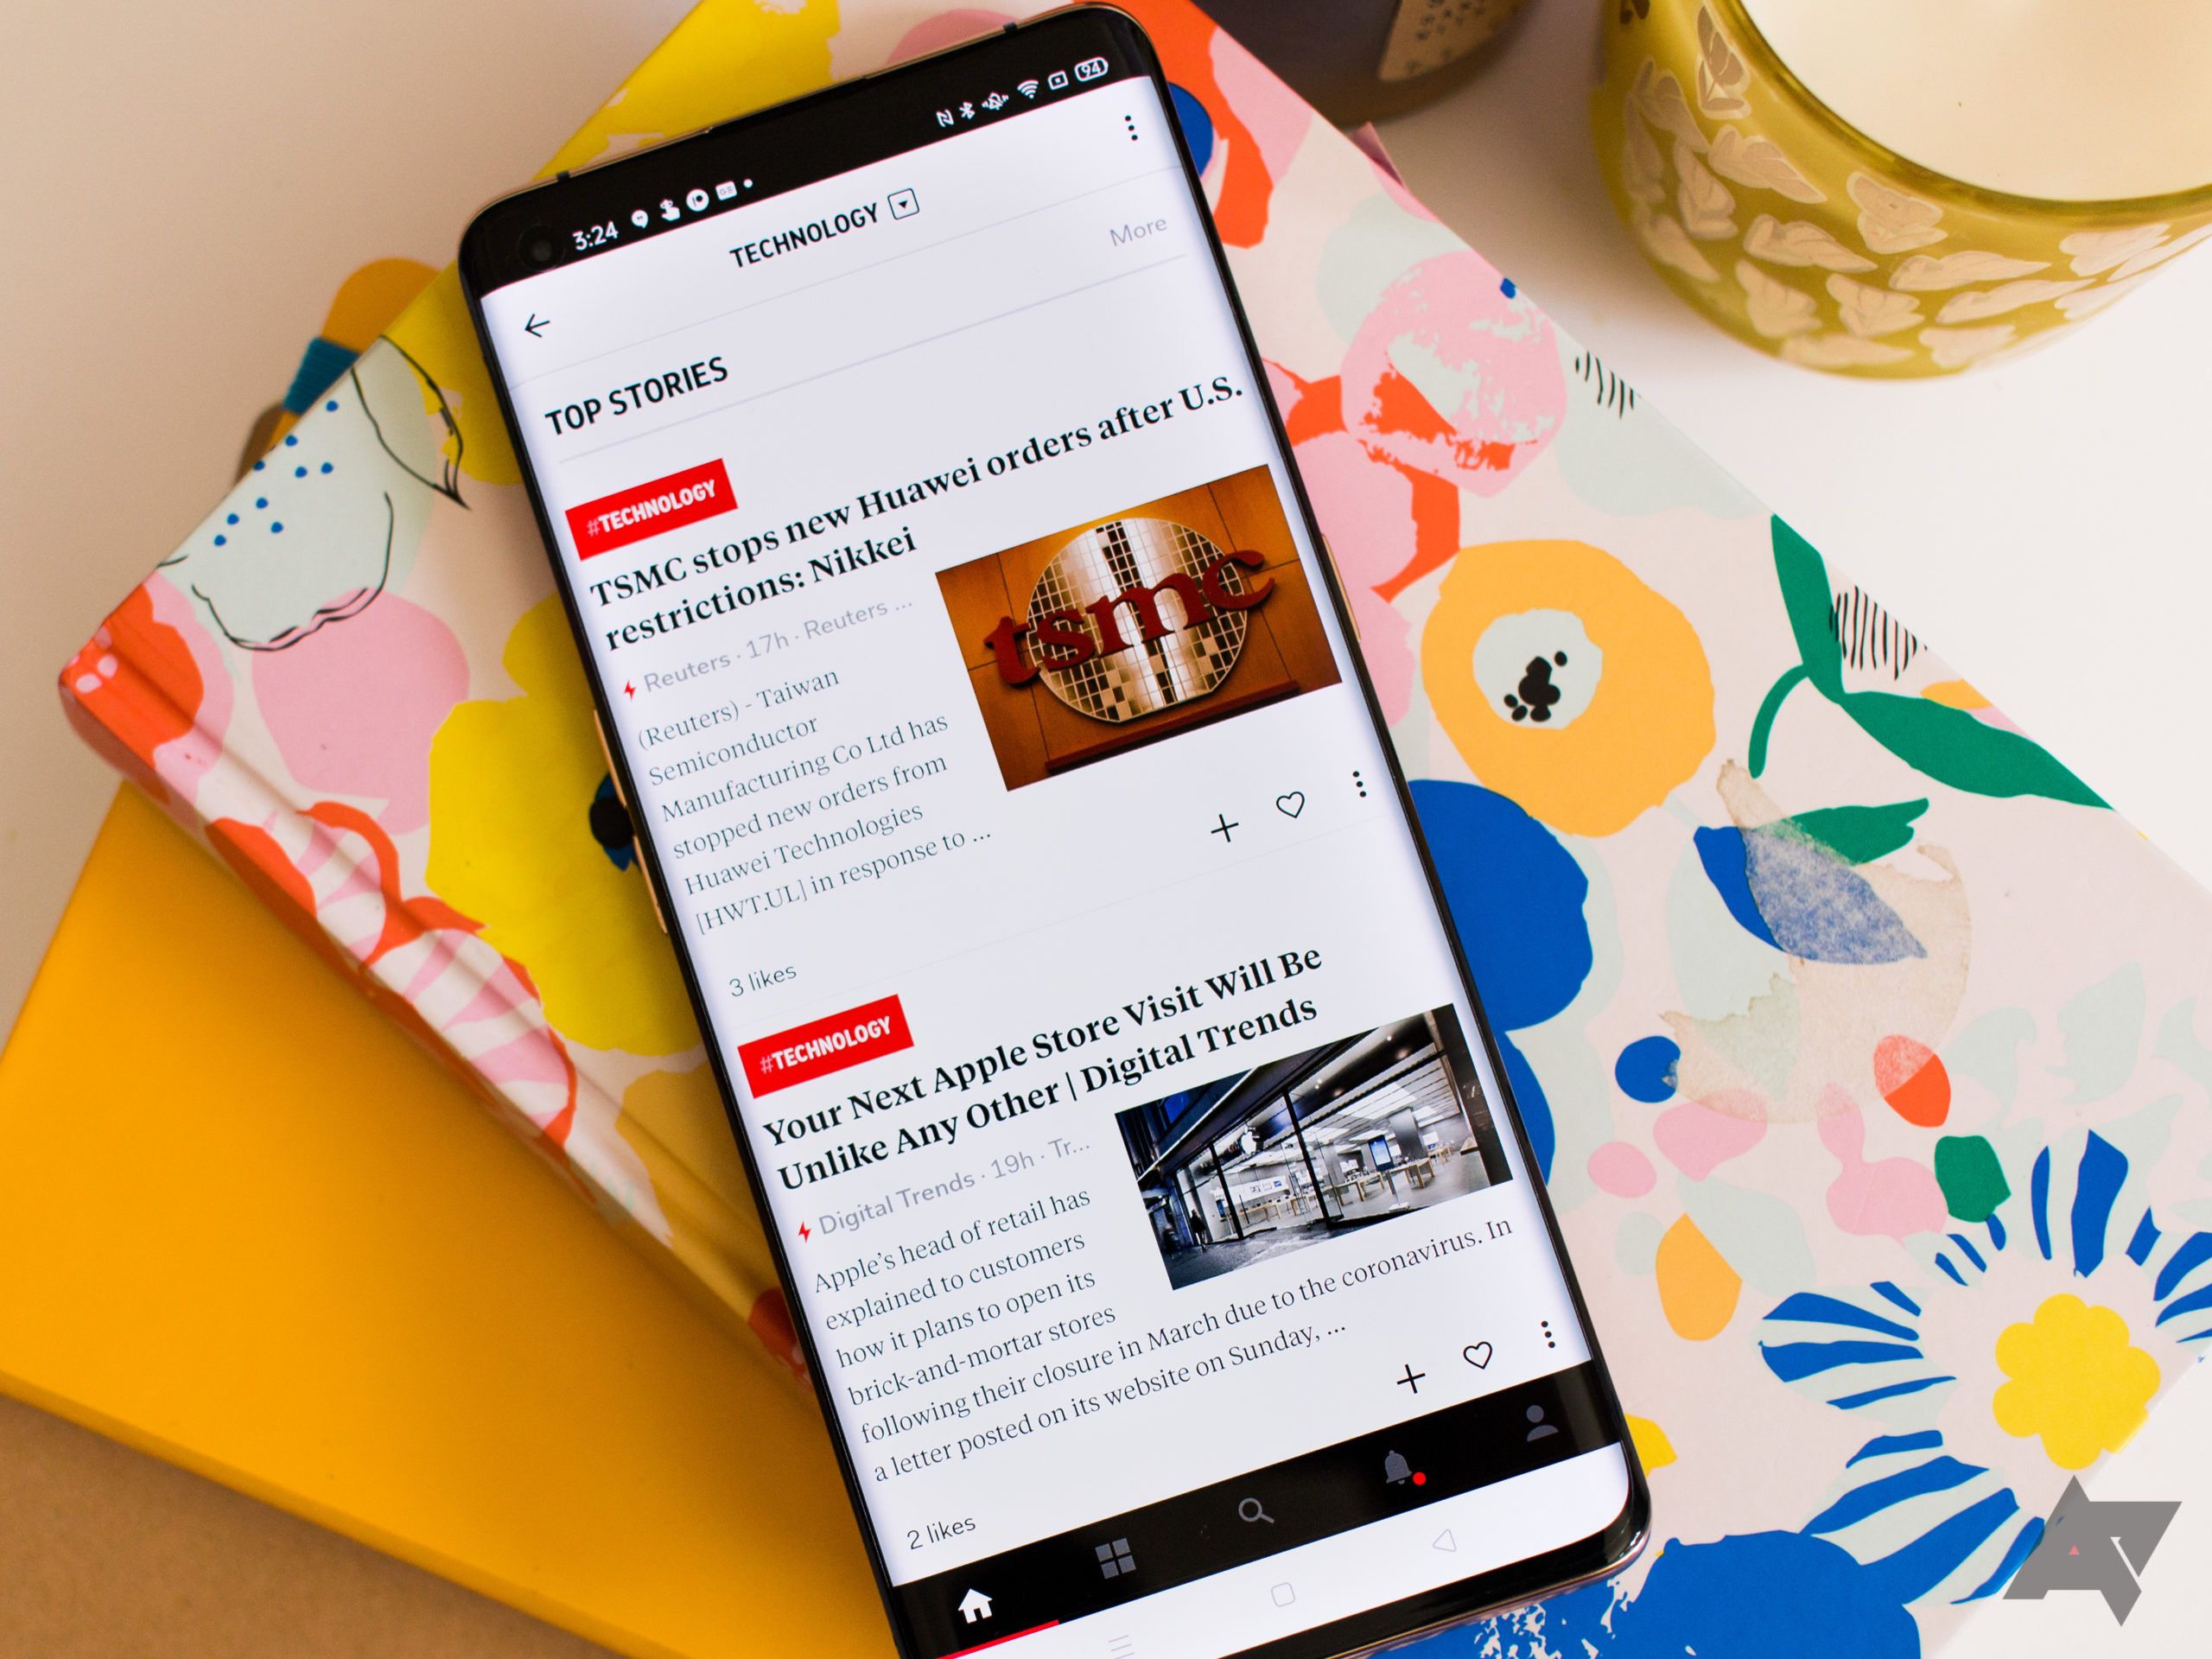 The best curated news apps for Android smartphones